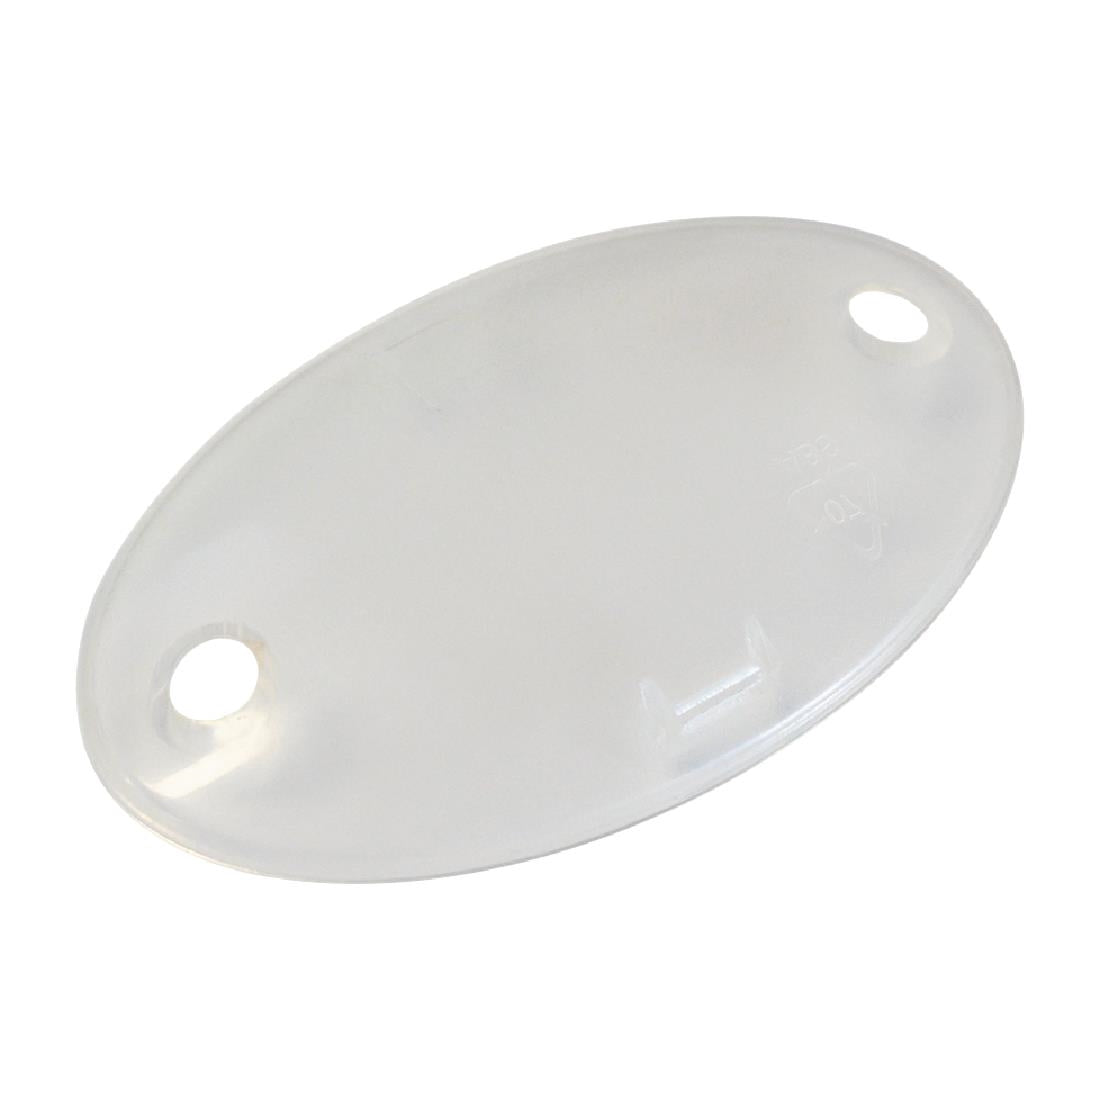 AK012 Nisbets Essentials Lamp Cover JD Catering Equipment Solutions Ltd